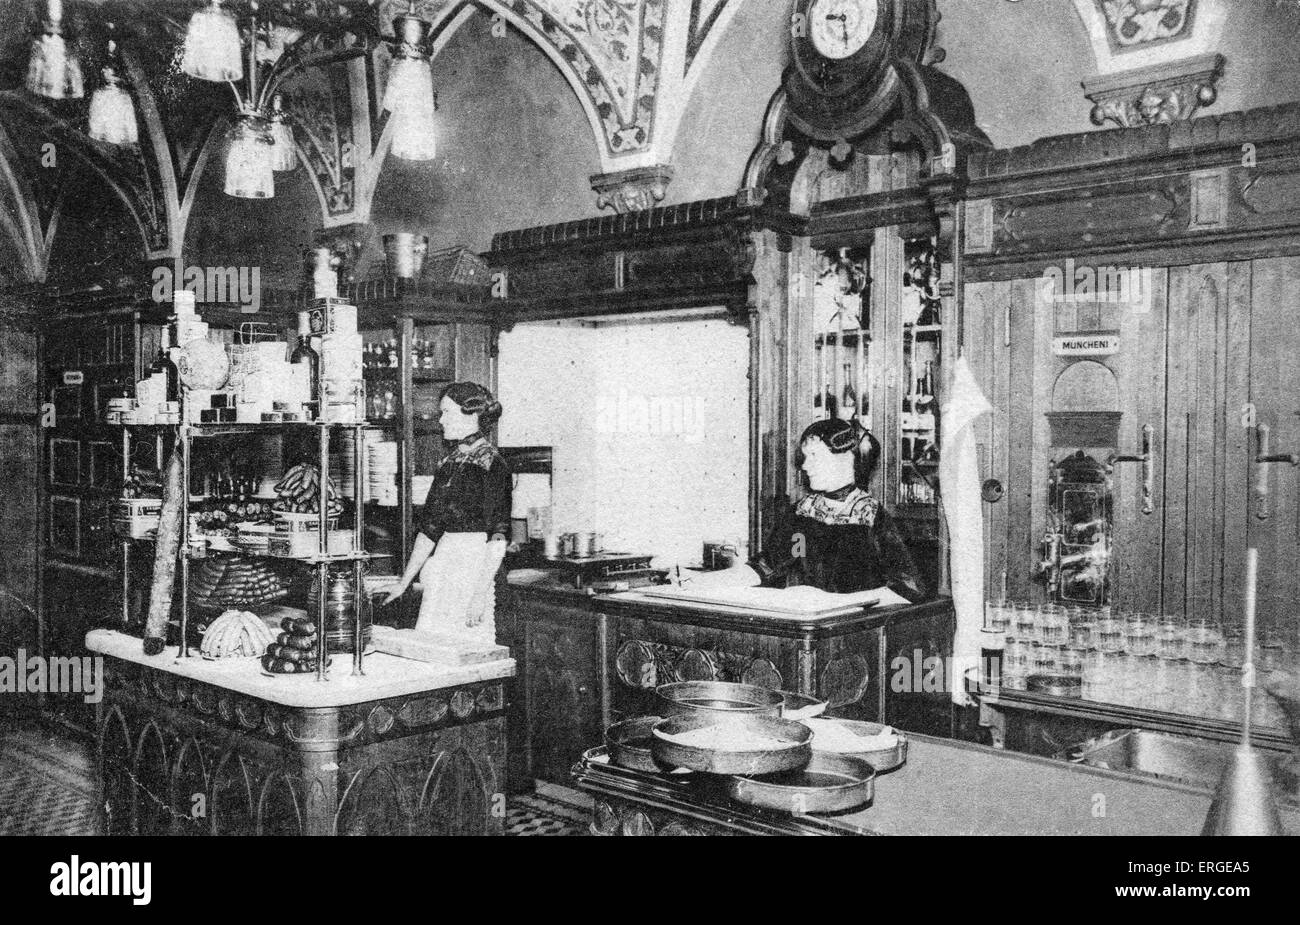 Förster János Apostolok  beer hall (sorozo), Budapest, Hungary. Stand to left selling sausages and other snacks. C. 1900. Stock Photo